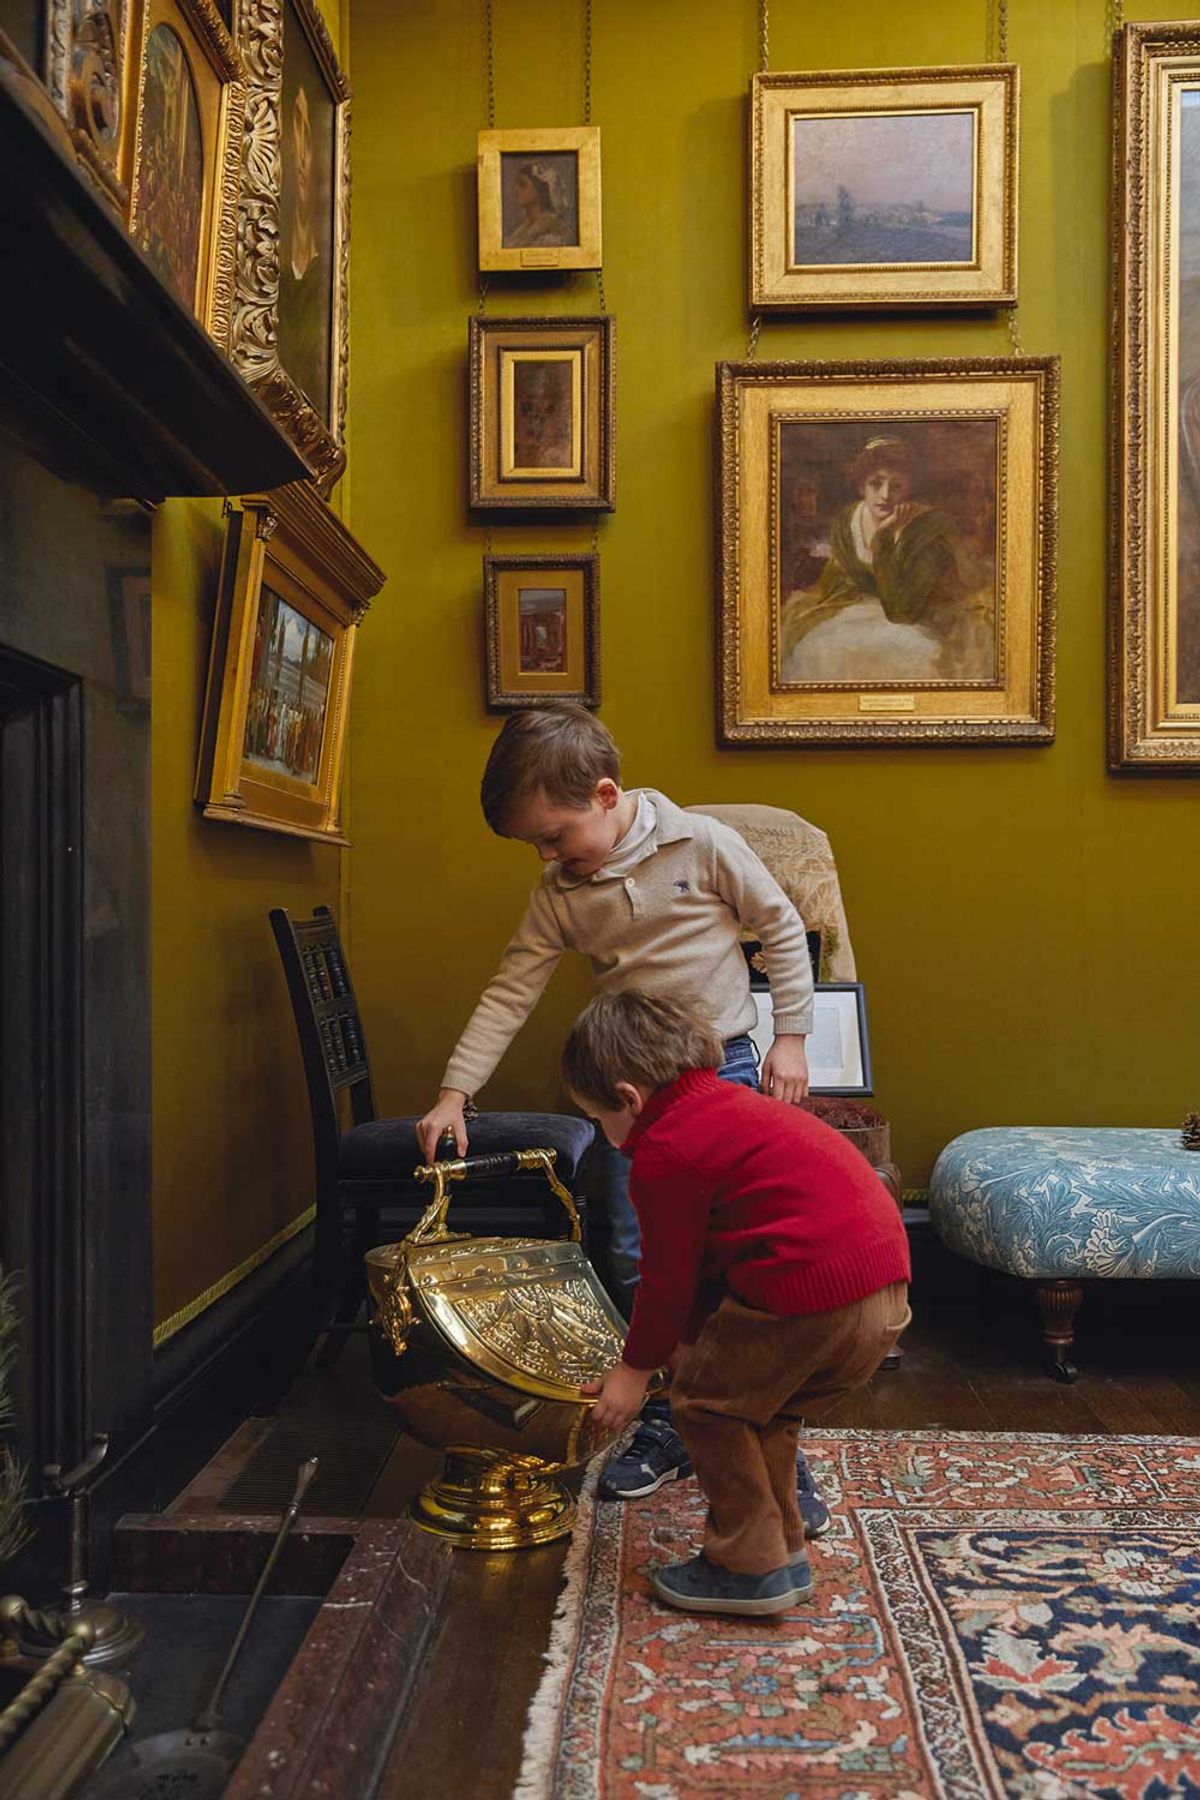 Children looking at the Victorian brass coal scuttle in the Silk Room at Leighton House

© Janie Airey 



